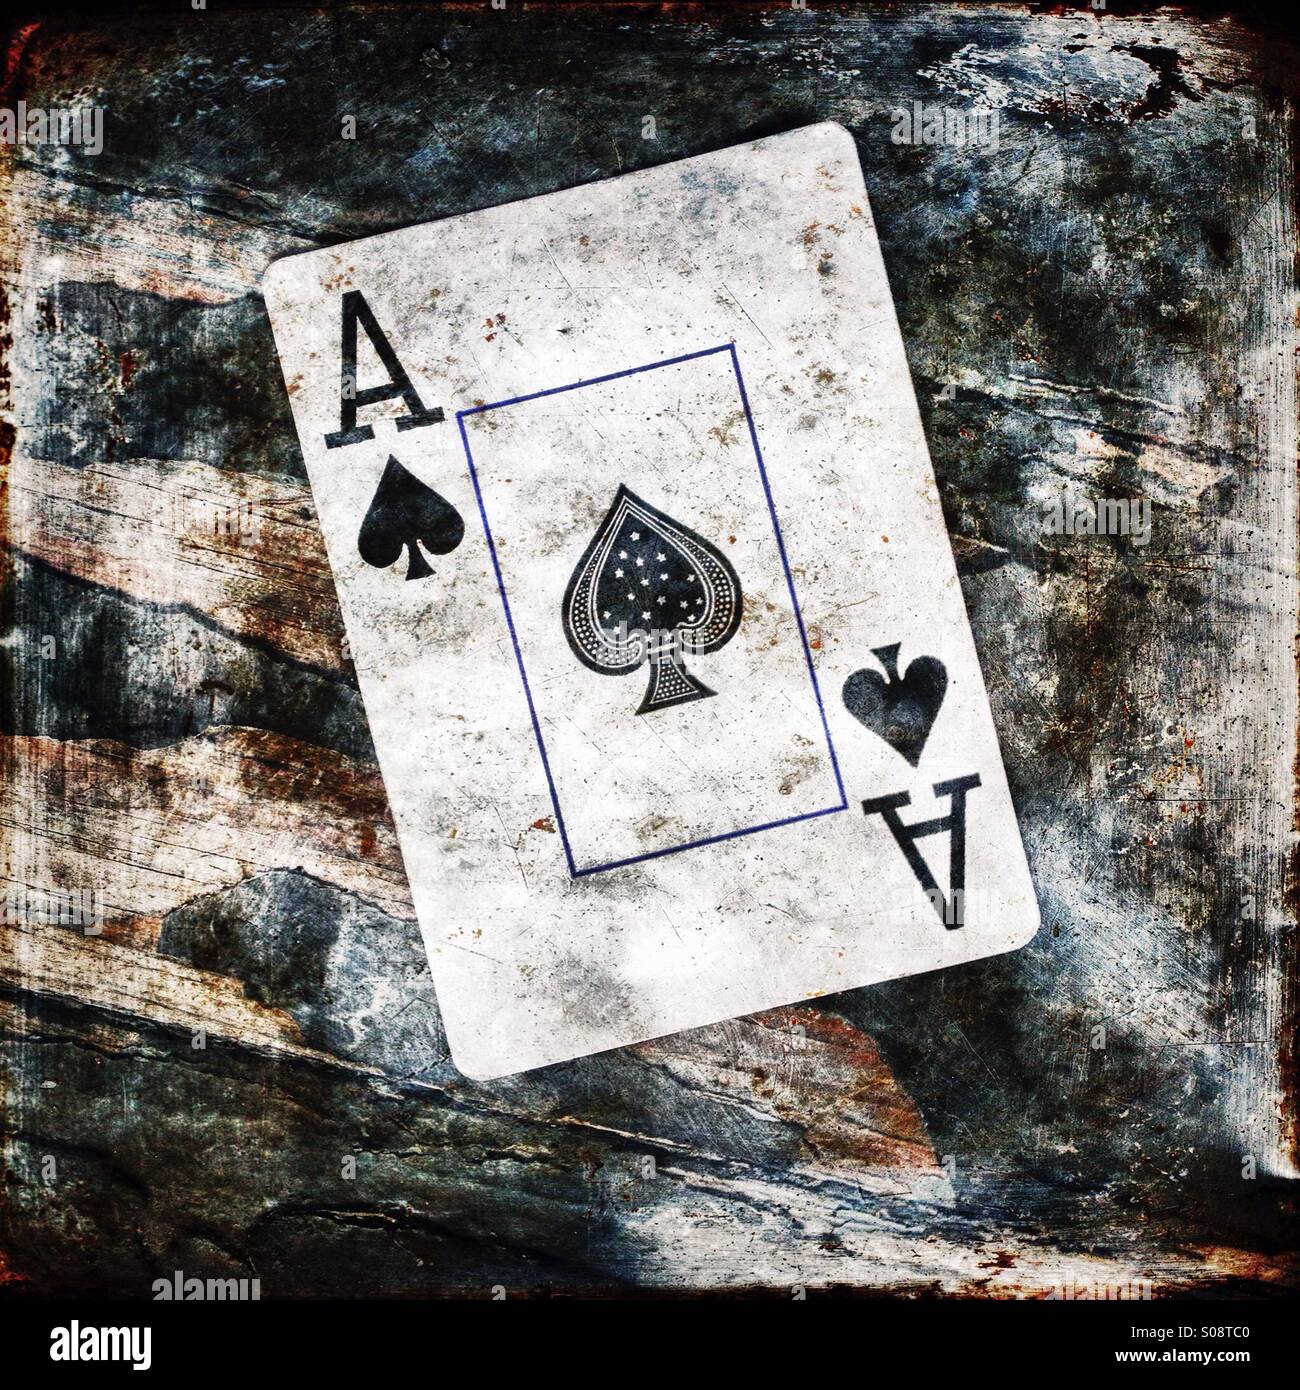 The ace of spades from a deck of playing cards. Stock Photo